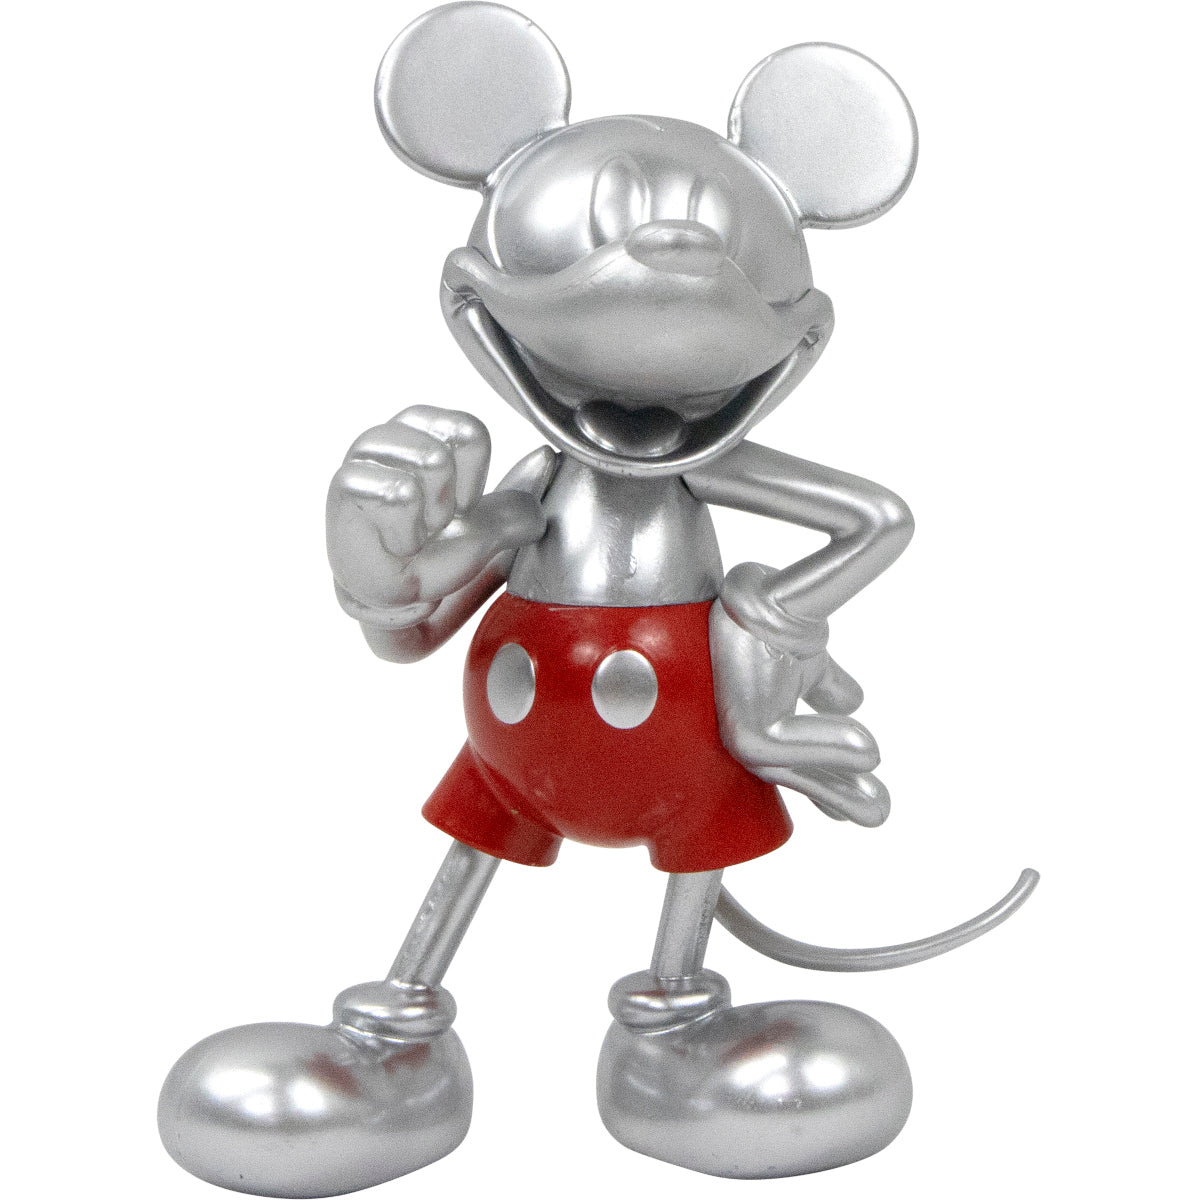 Disney 100 Mickey & Friends Figure Pack by Fisher-Price Little